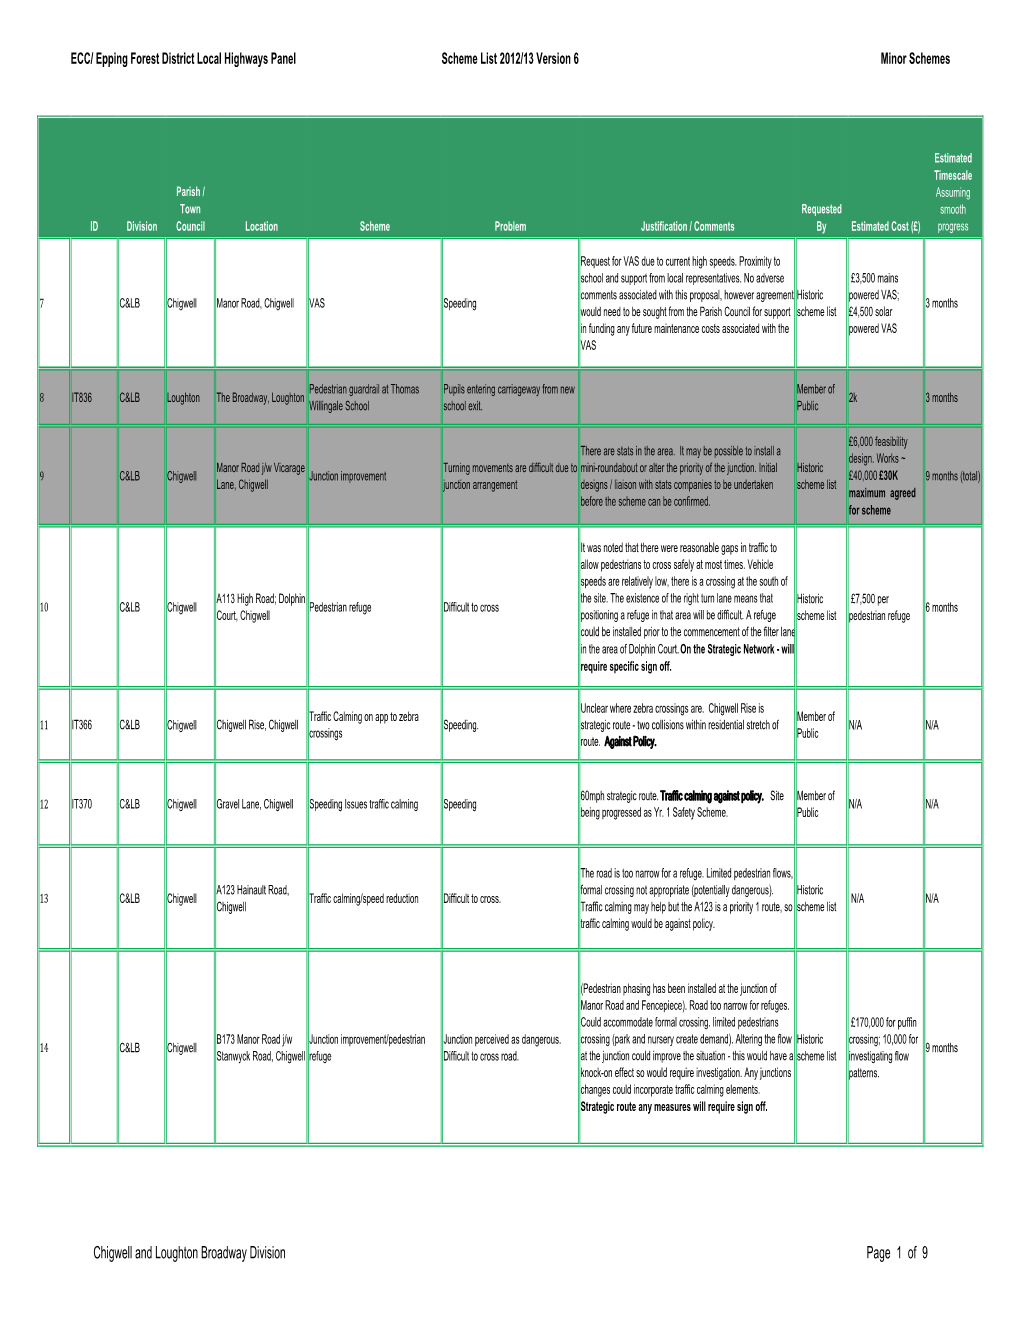 Chigwell and Loughton Broadway Division Page 1 of 9 ECC/ Epping Forest District Local Highways Panel Scheme List 2012/13 Version 6 Minor Schemes